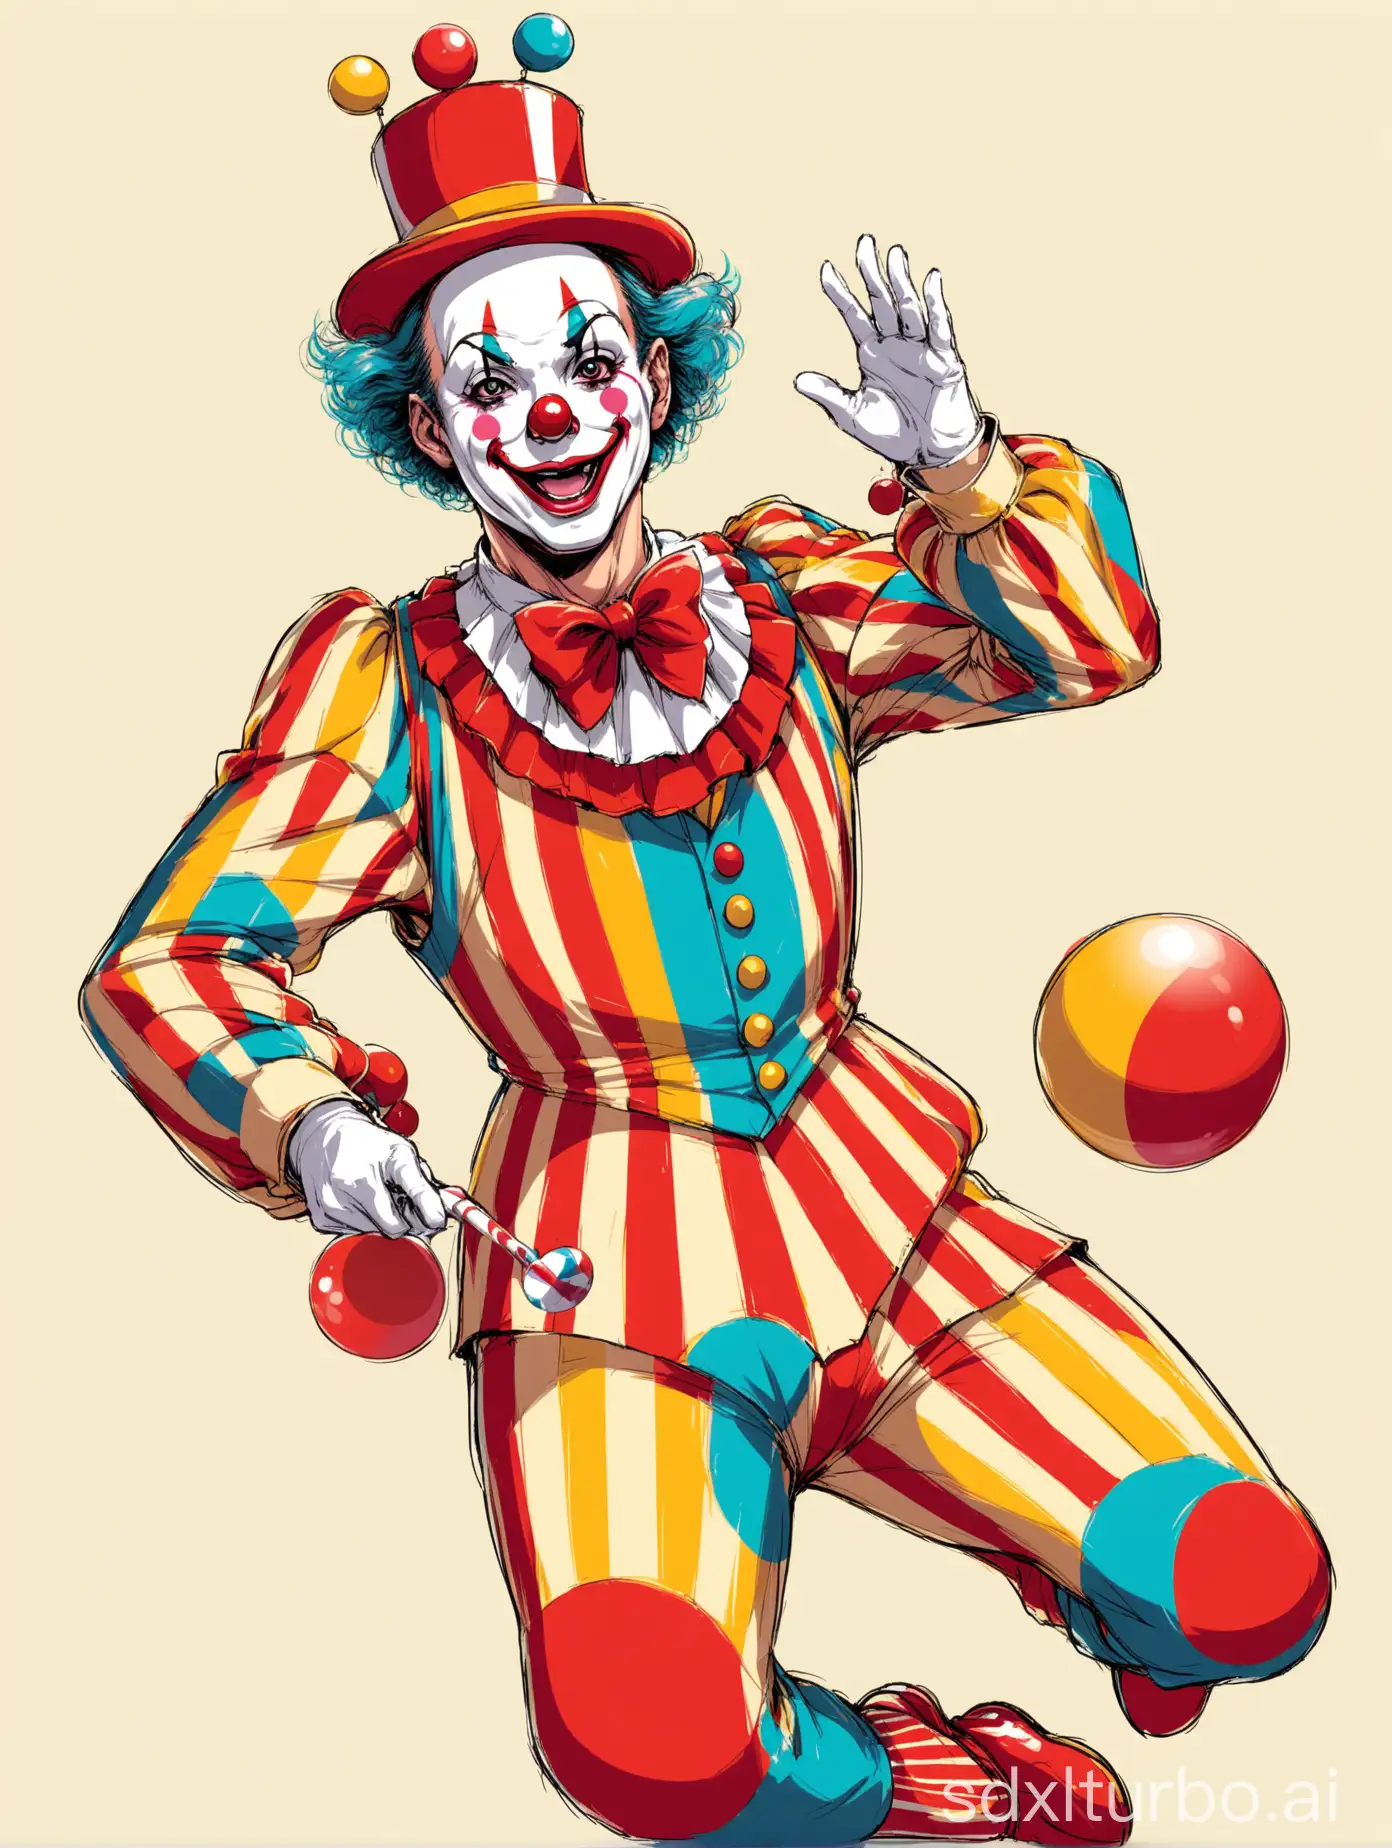 A clown from a circus playing tricks, without background